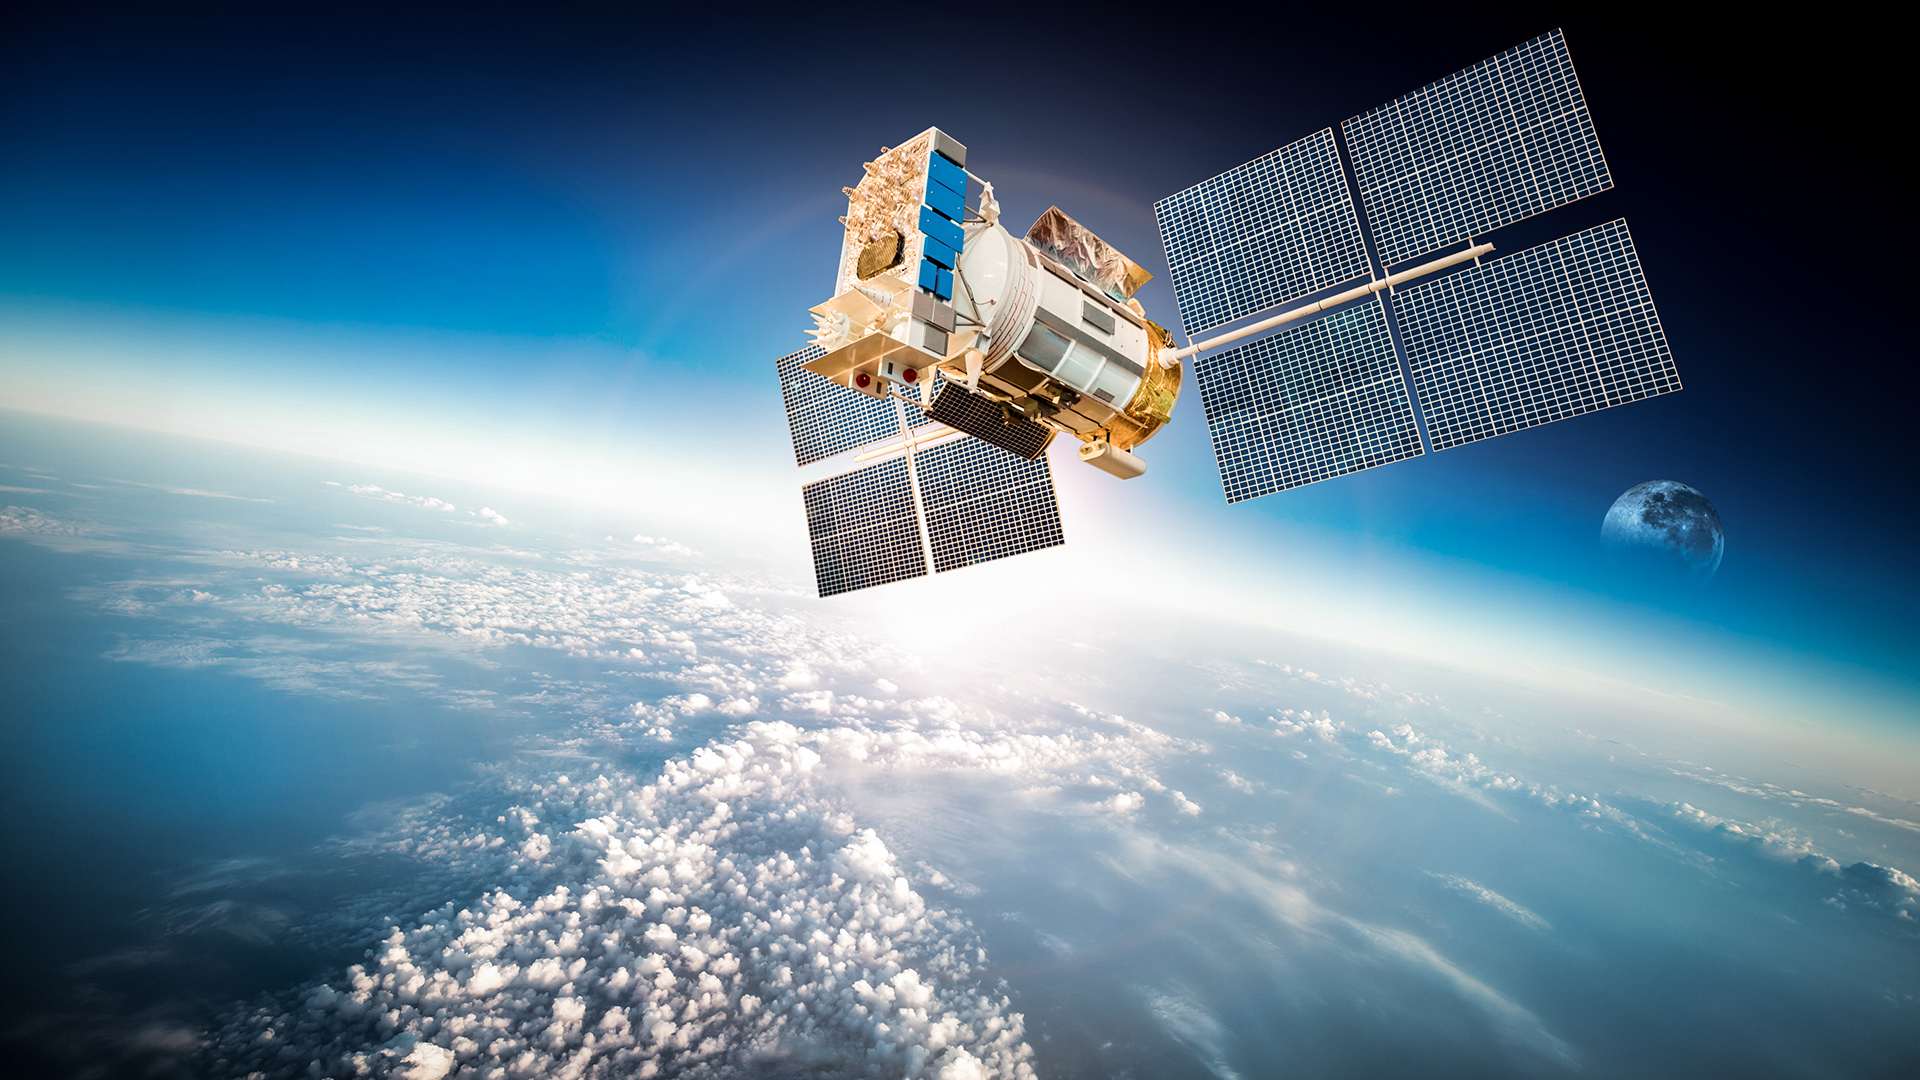 The satellite connectivity revolution: The race for global coverage in a new mobile phone industry